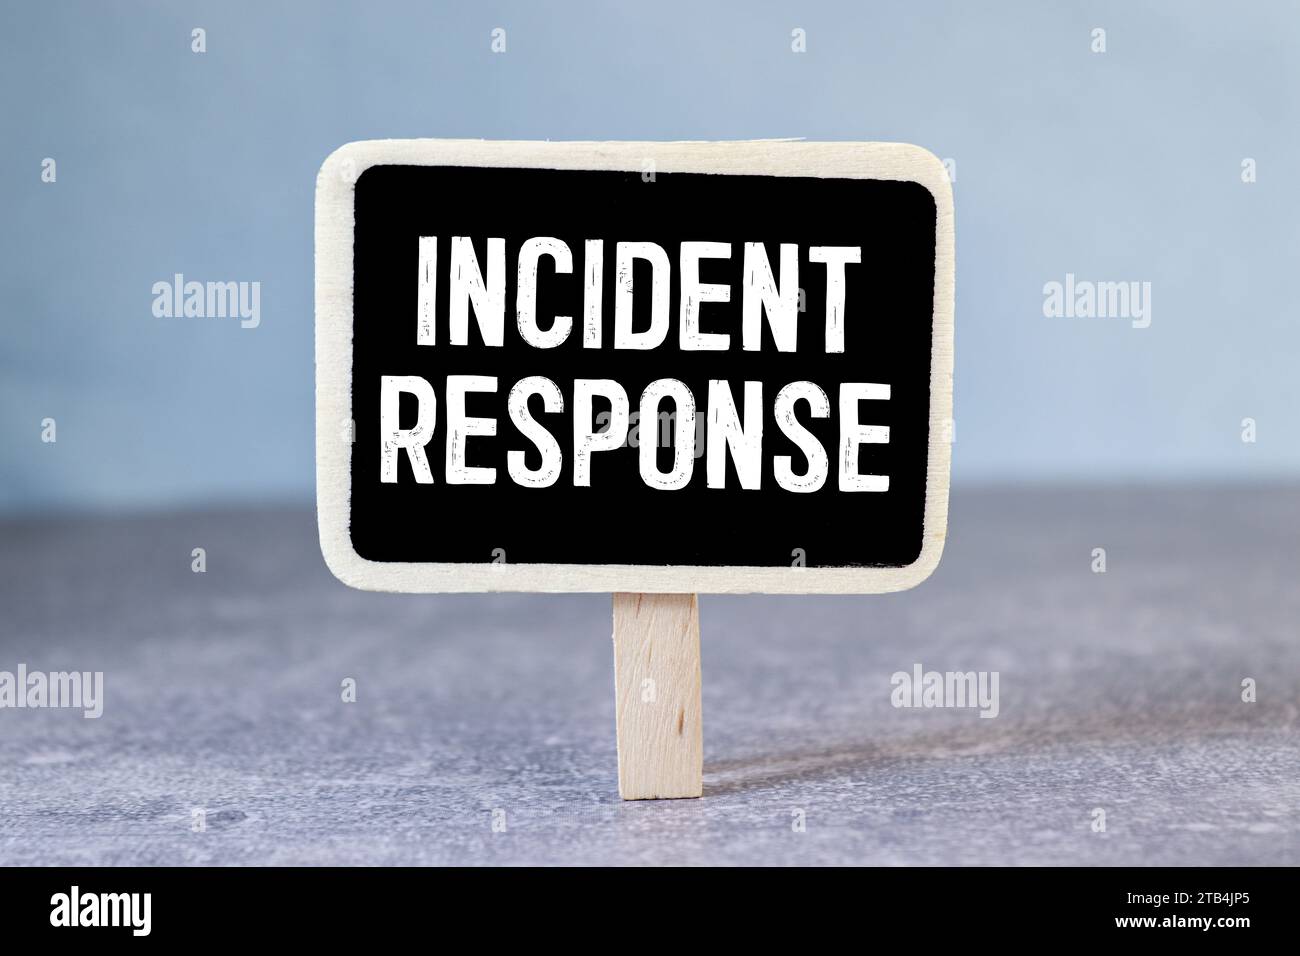 Incident response - organized approach to addressing and managing the aftermath of a security breach or cyberattack, text concept on notepad Stock Photo